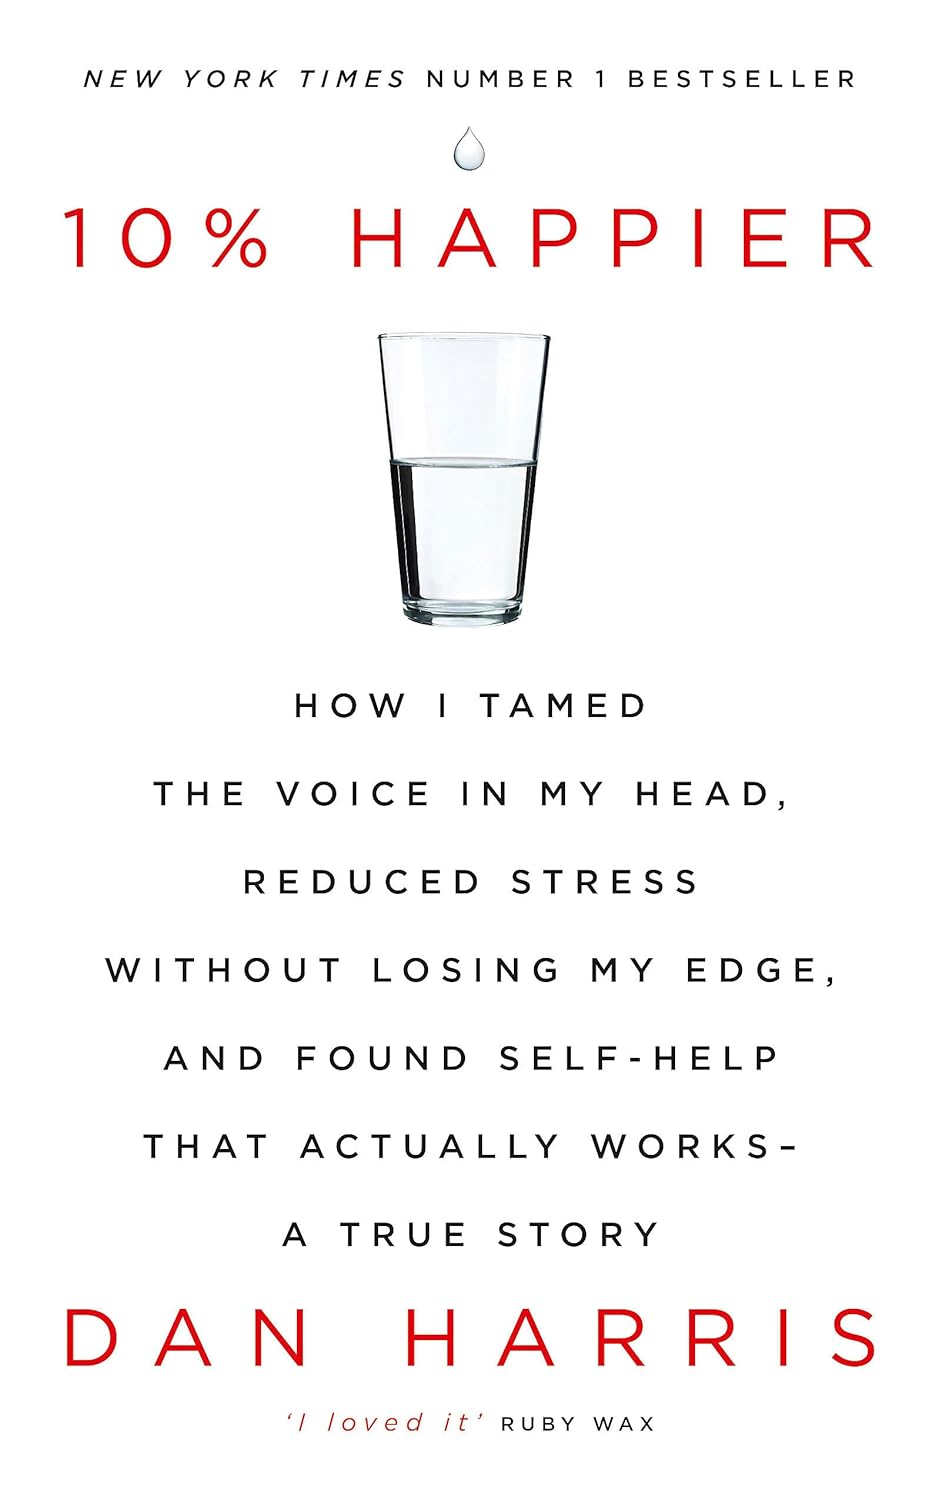 10% HAPPIER: HOW I TAMED THE VOICE IN MY HEAD, REDUCED STRESS WITHOUT LOSING MY EDGE, AND FOUND SELF by Dan Harris